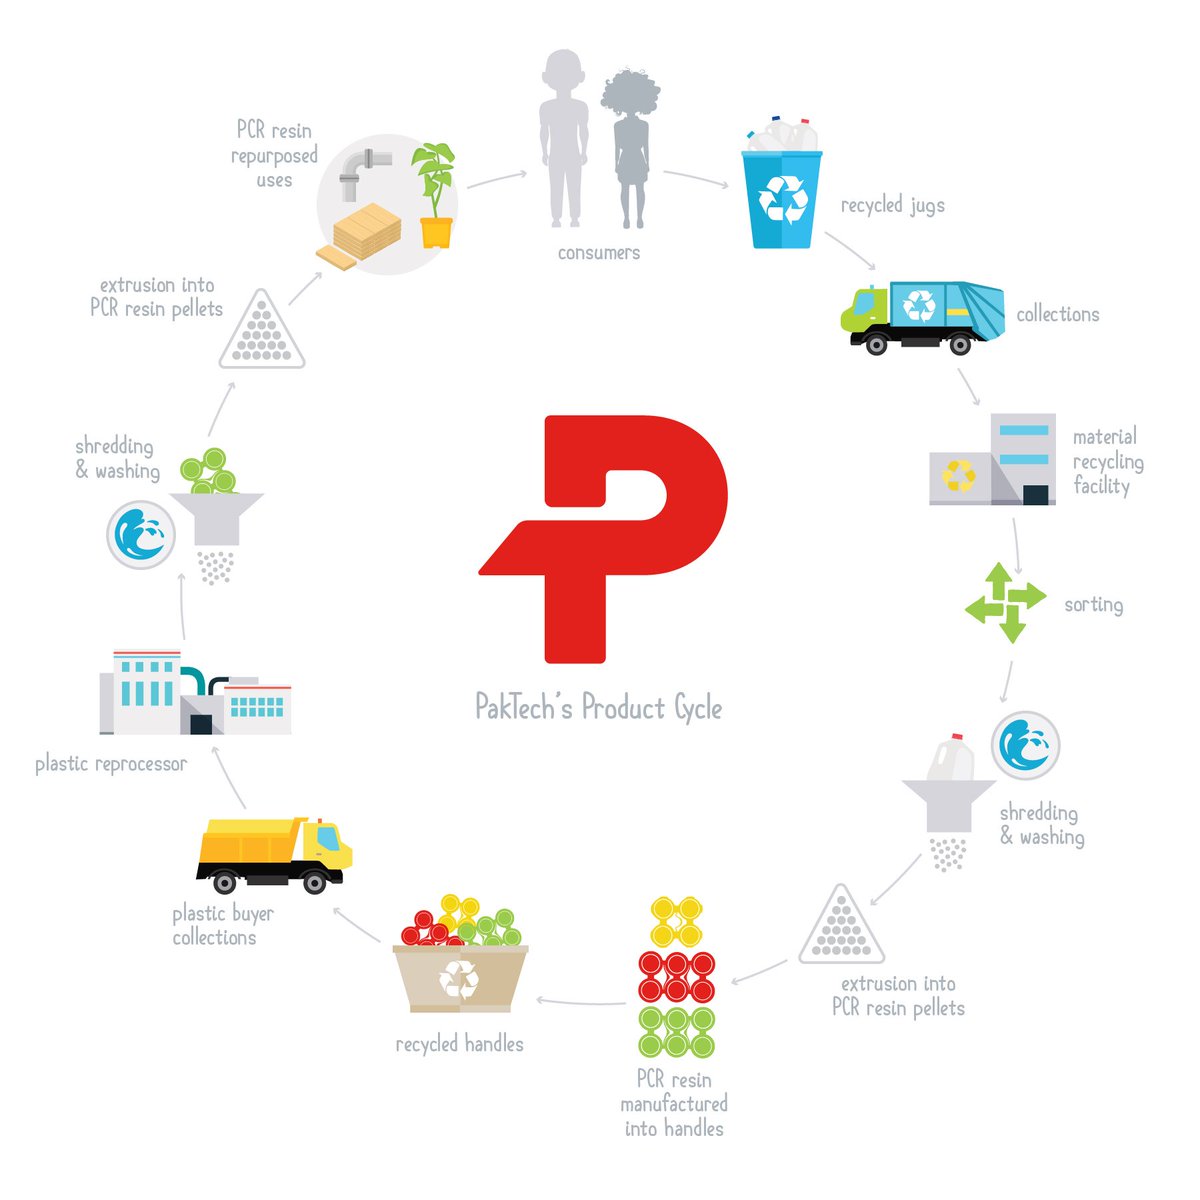 PakTech’s full circle product cycle. ♻️ #sustainability #repurposed #recycled #greenpackaging #sustainablepackaging #recycledpackaging #craftbeerpackaging #beerpackaging #winepackaging